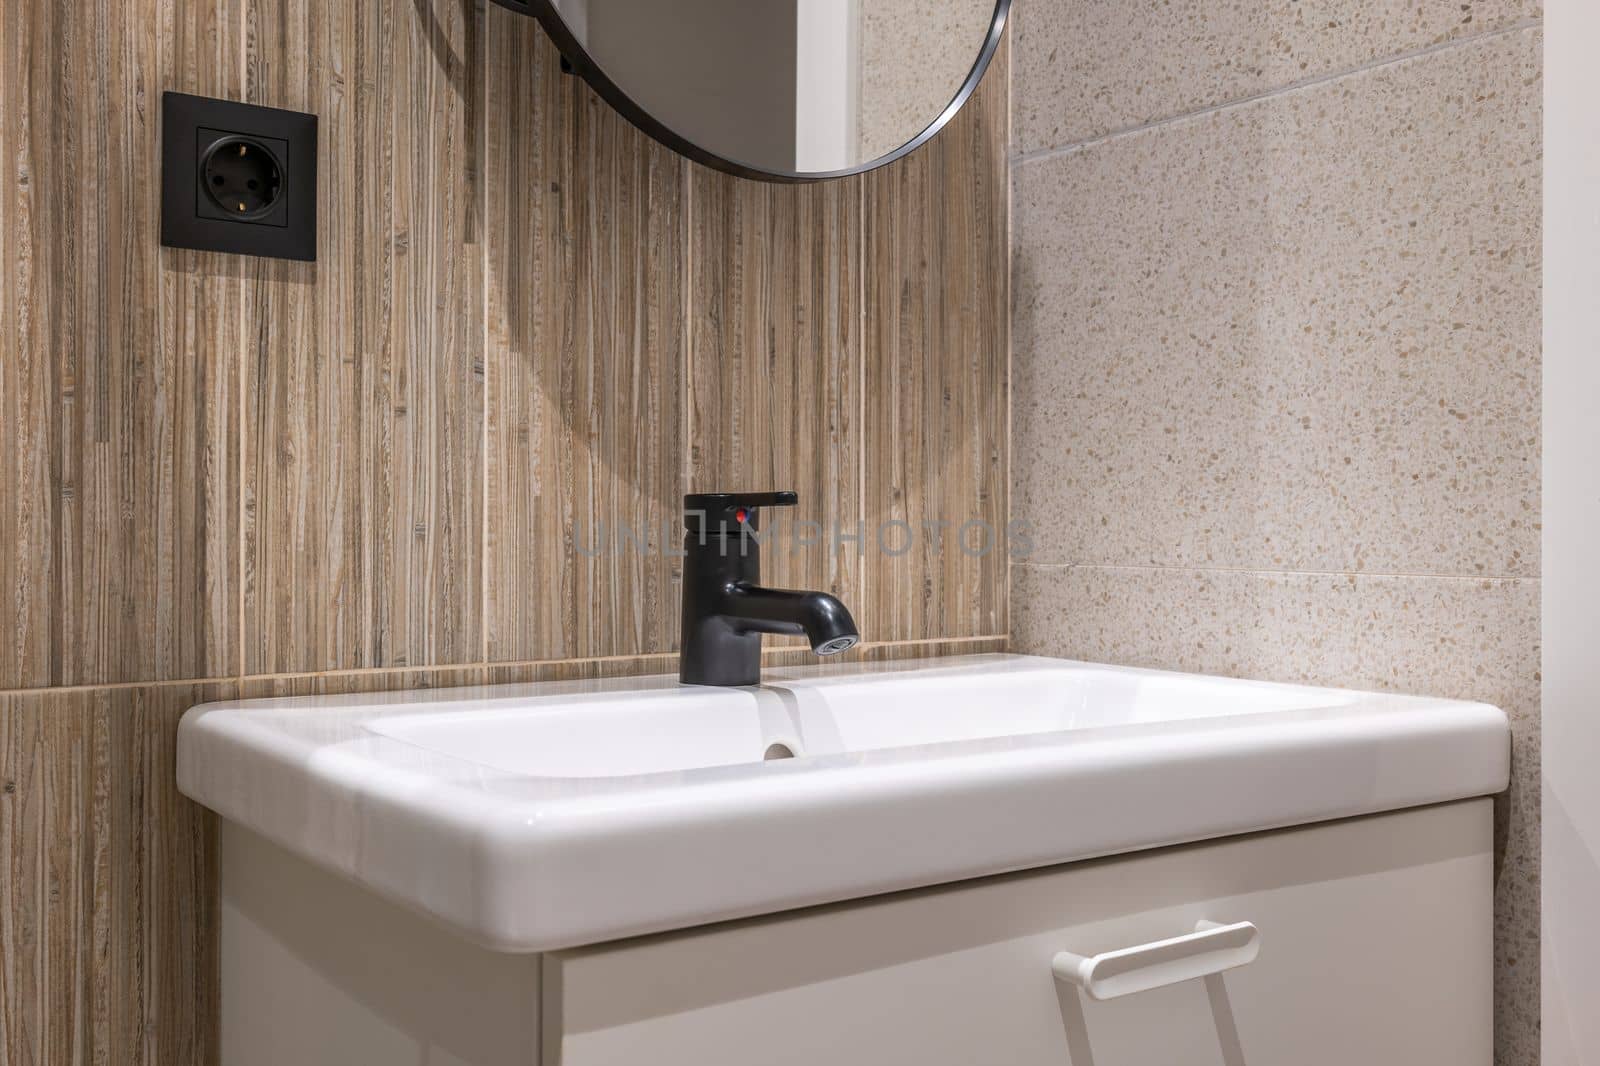 Bathroom sink on vanity is illuminated by bright light from ceiling. Walls are combination of gray granite and wood grain marble tiles. Above sink is mirror in black frame, like faucet and an outlet. by apavlin